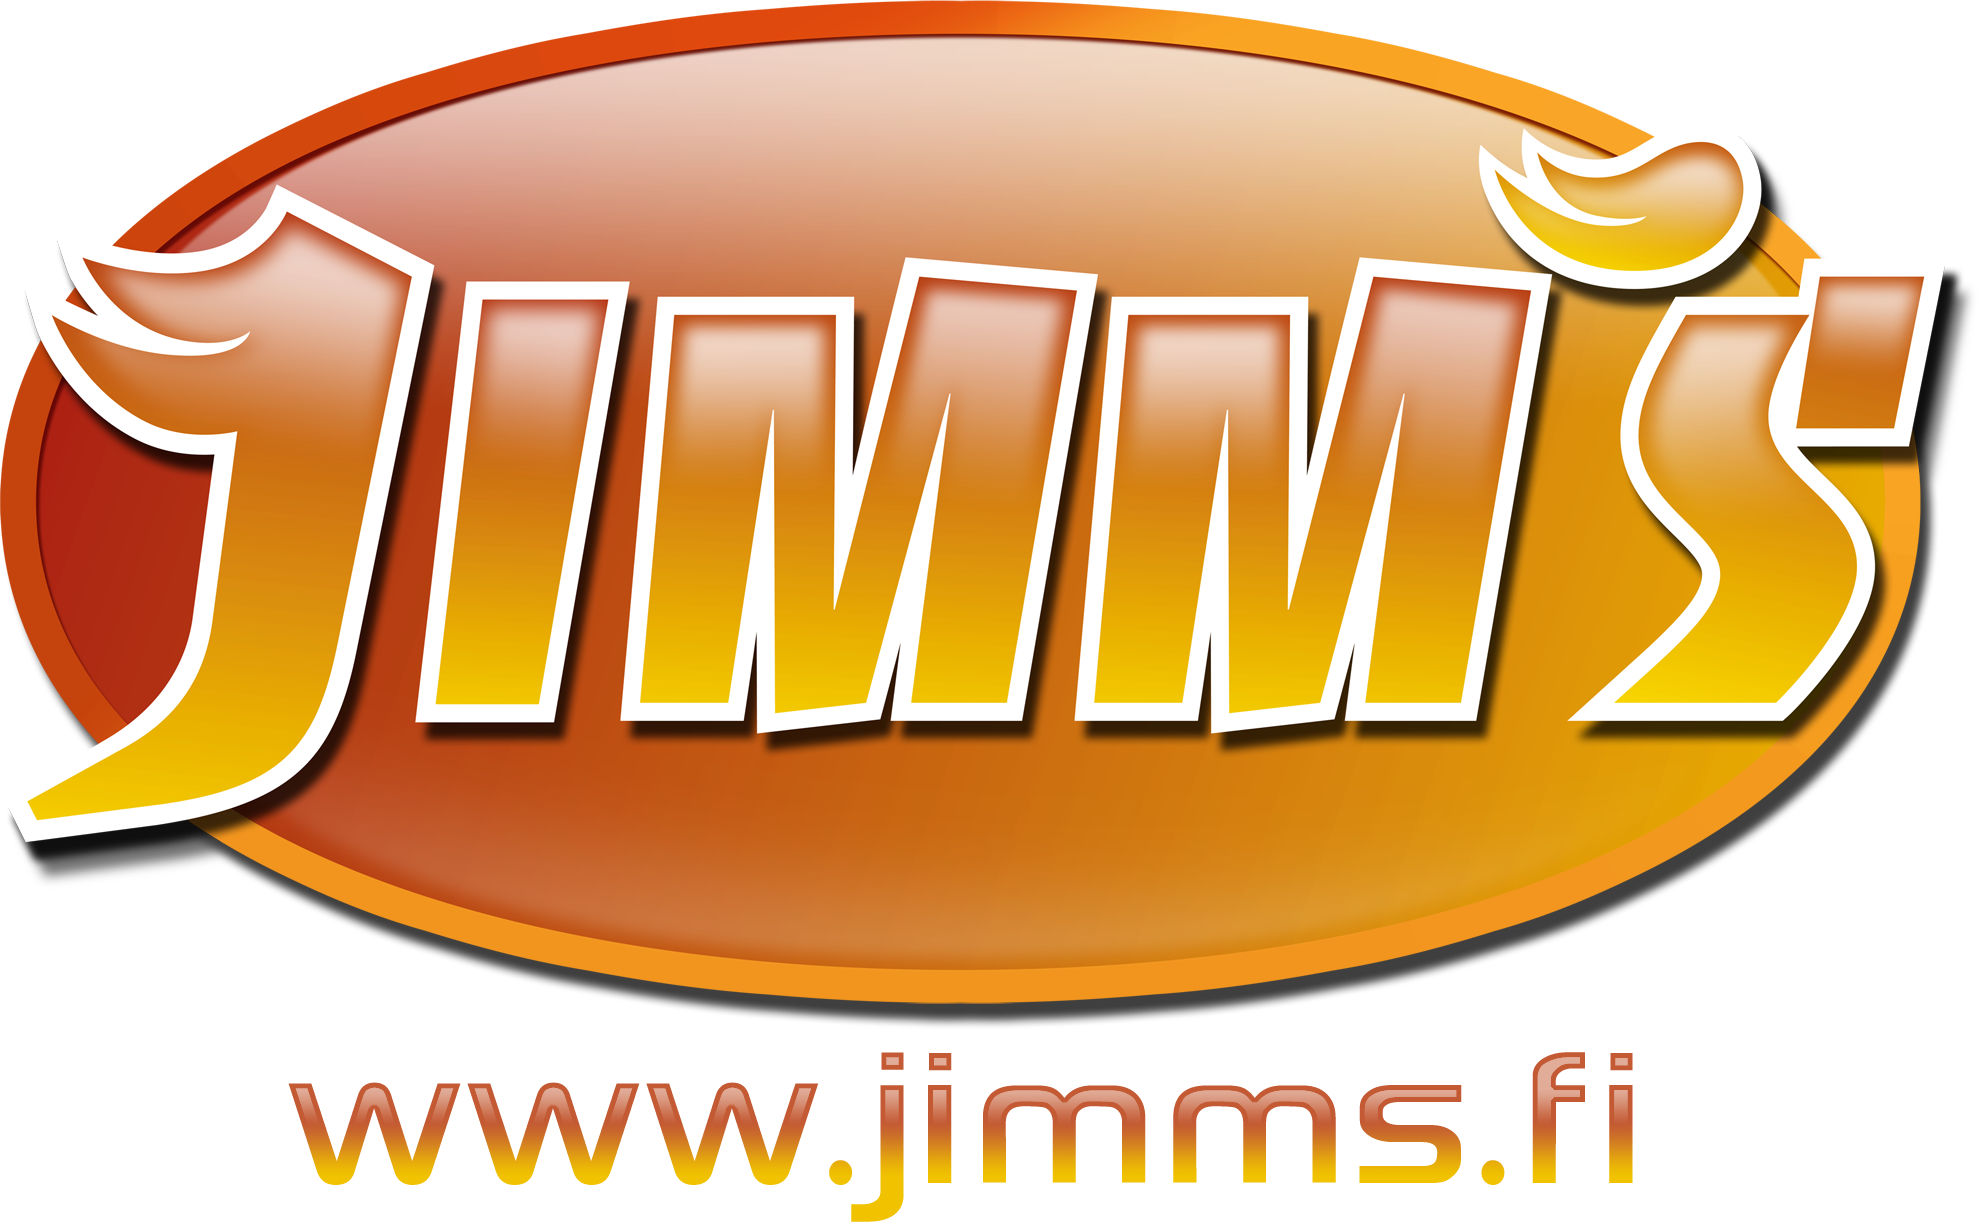 Jimm’s PC Store